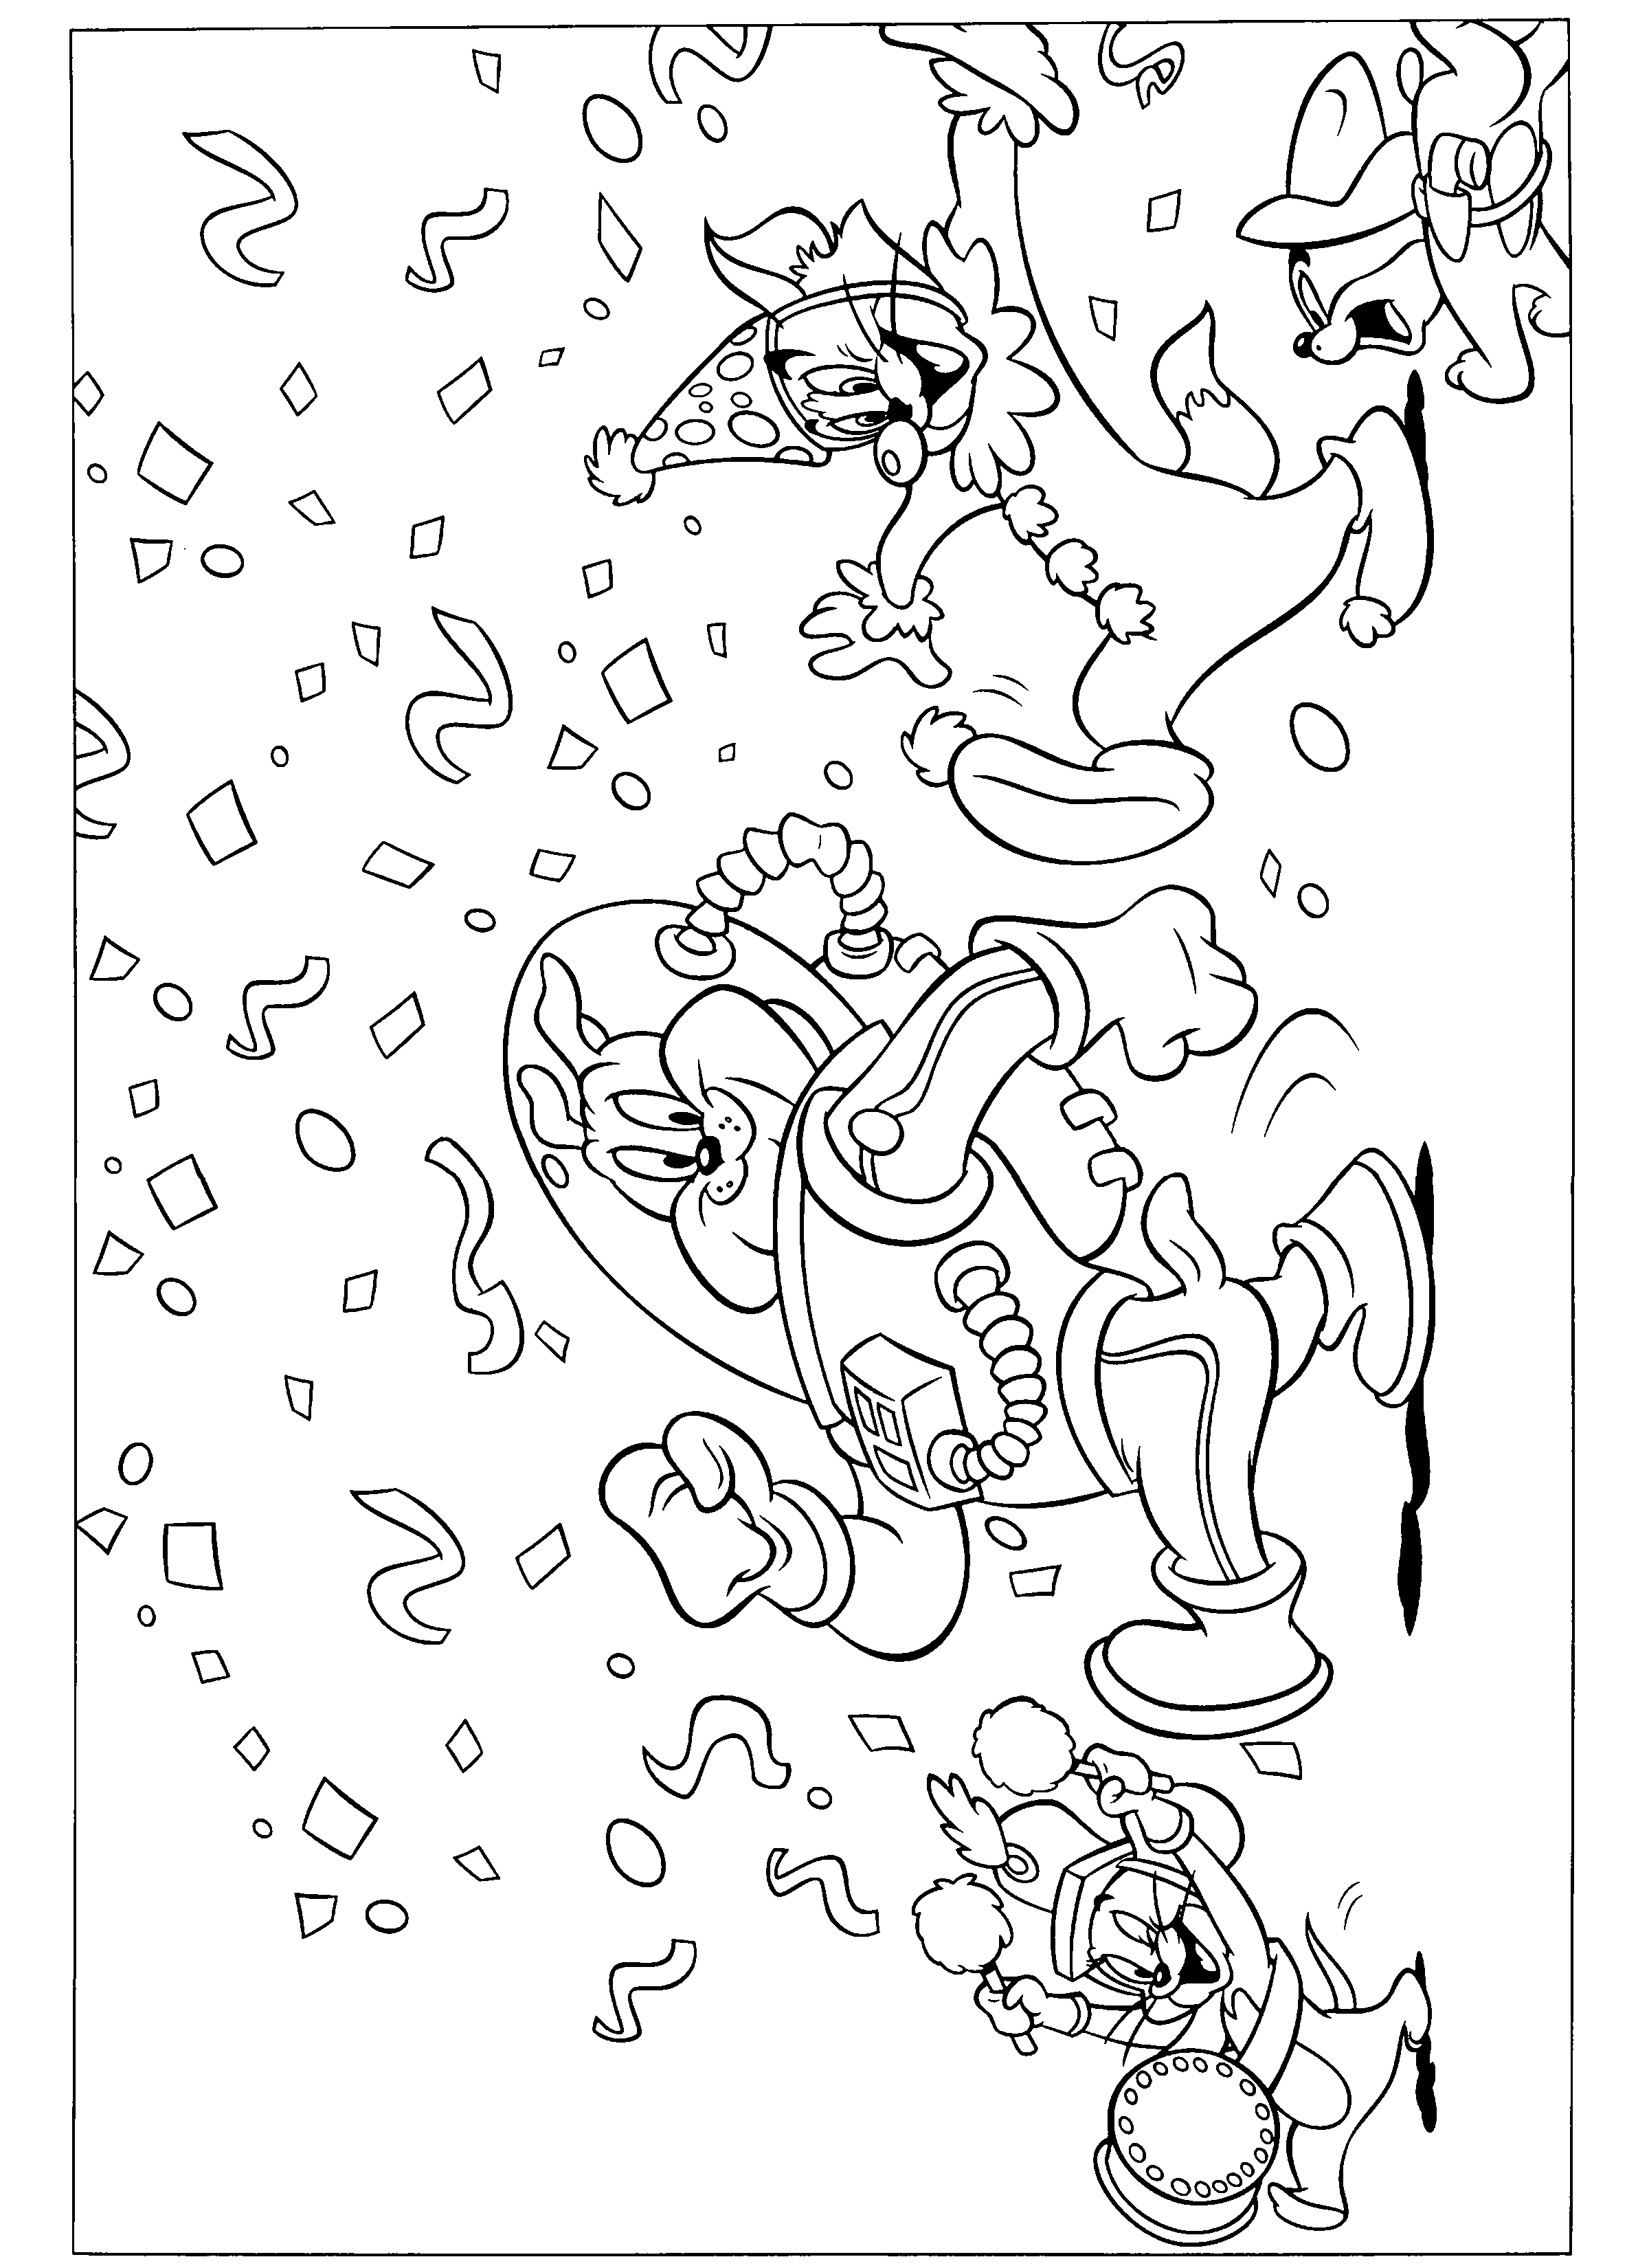 Tom and jerry Coloring Pages